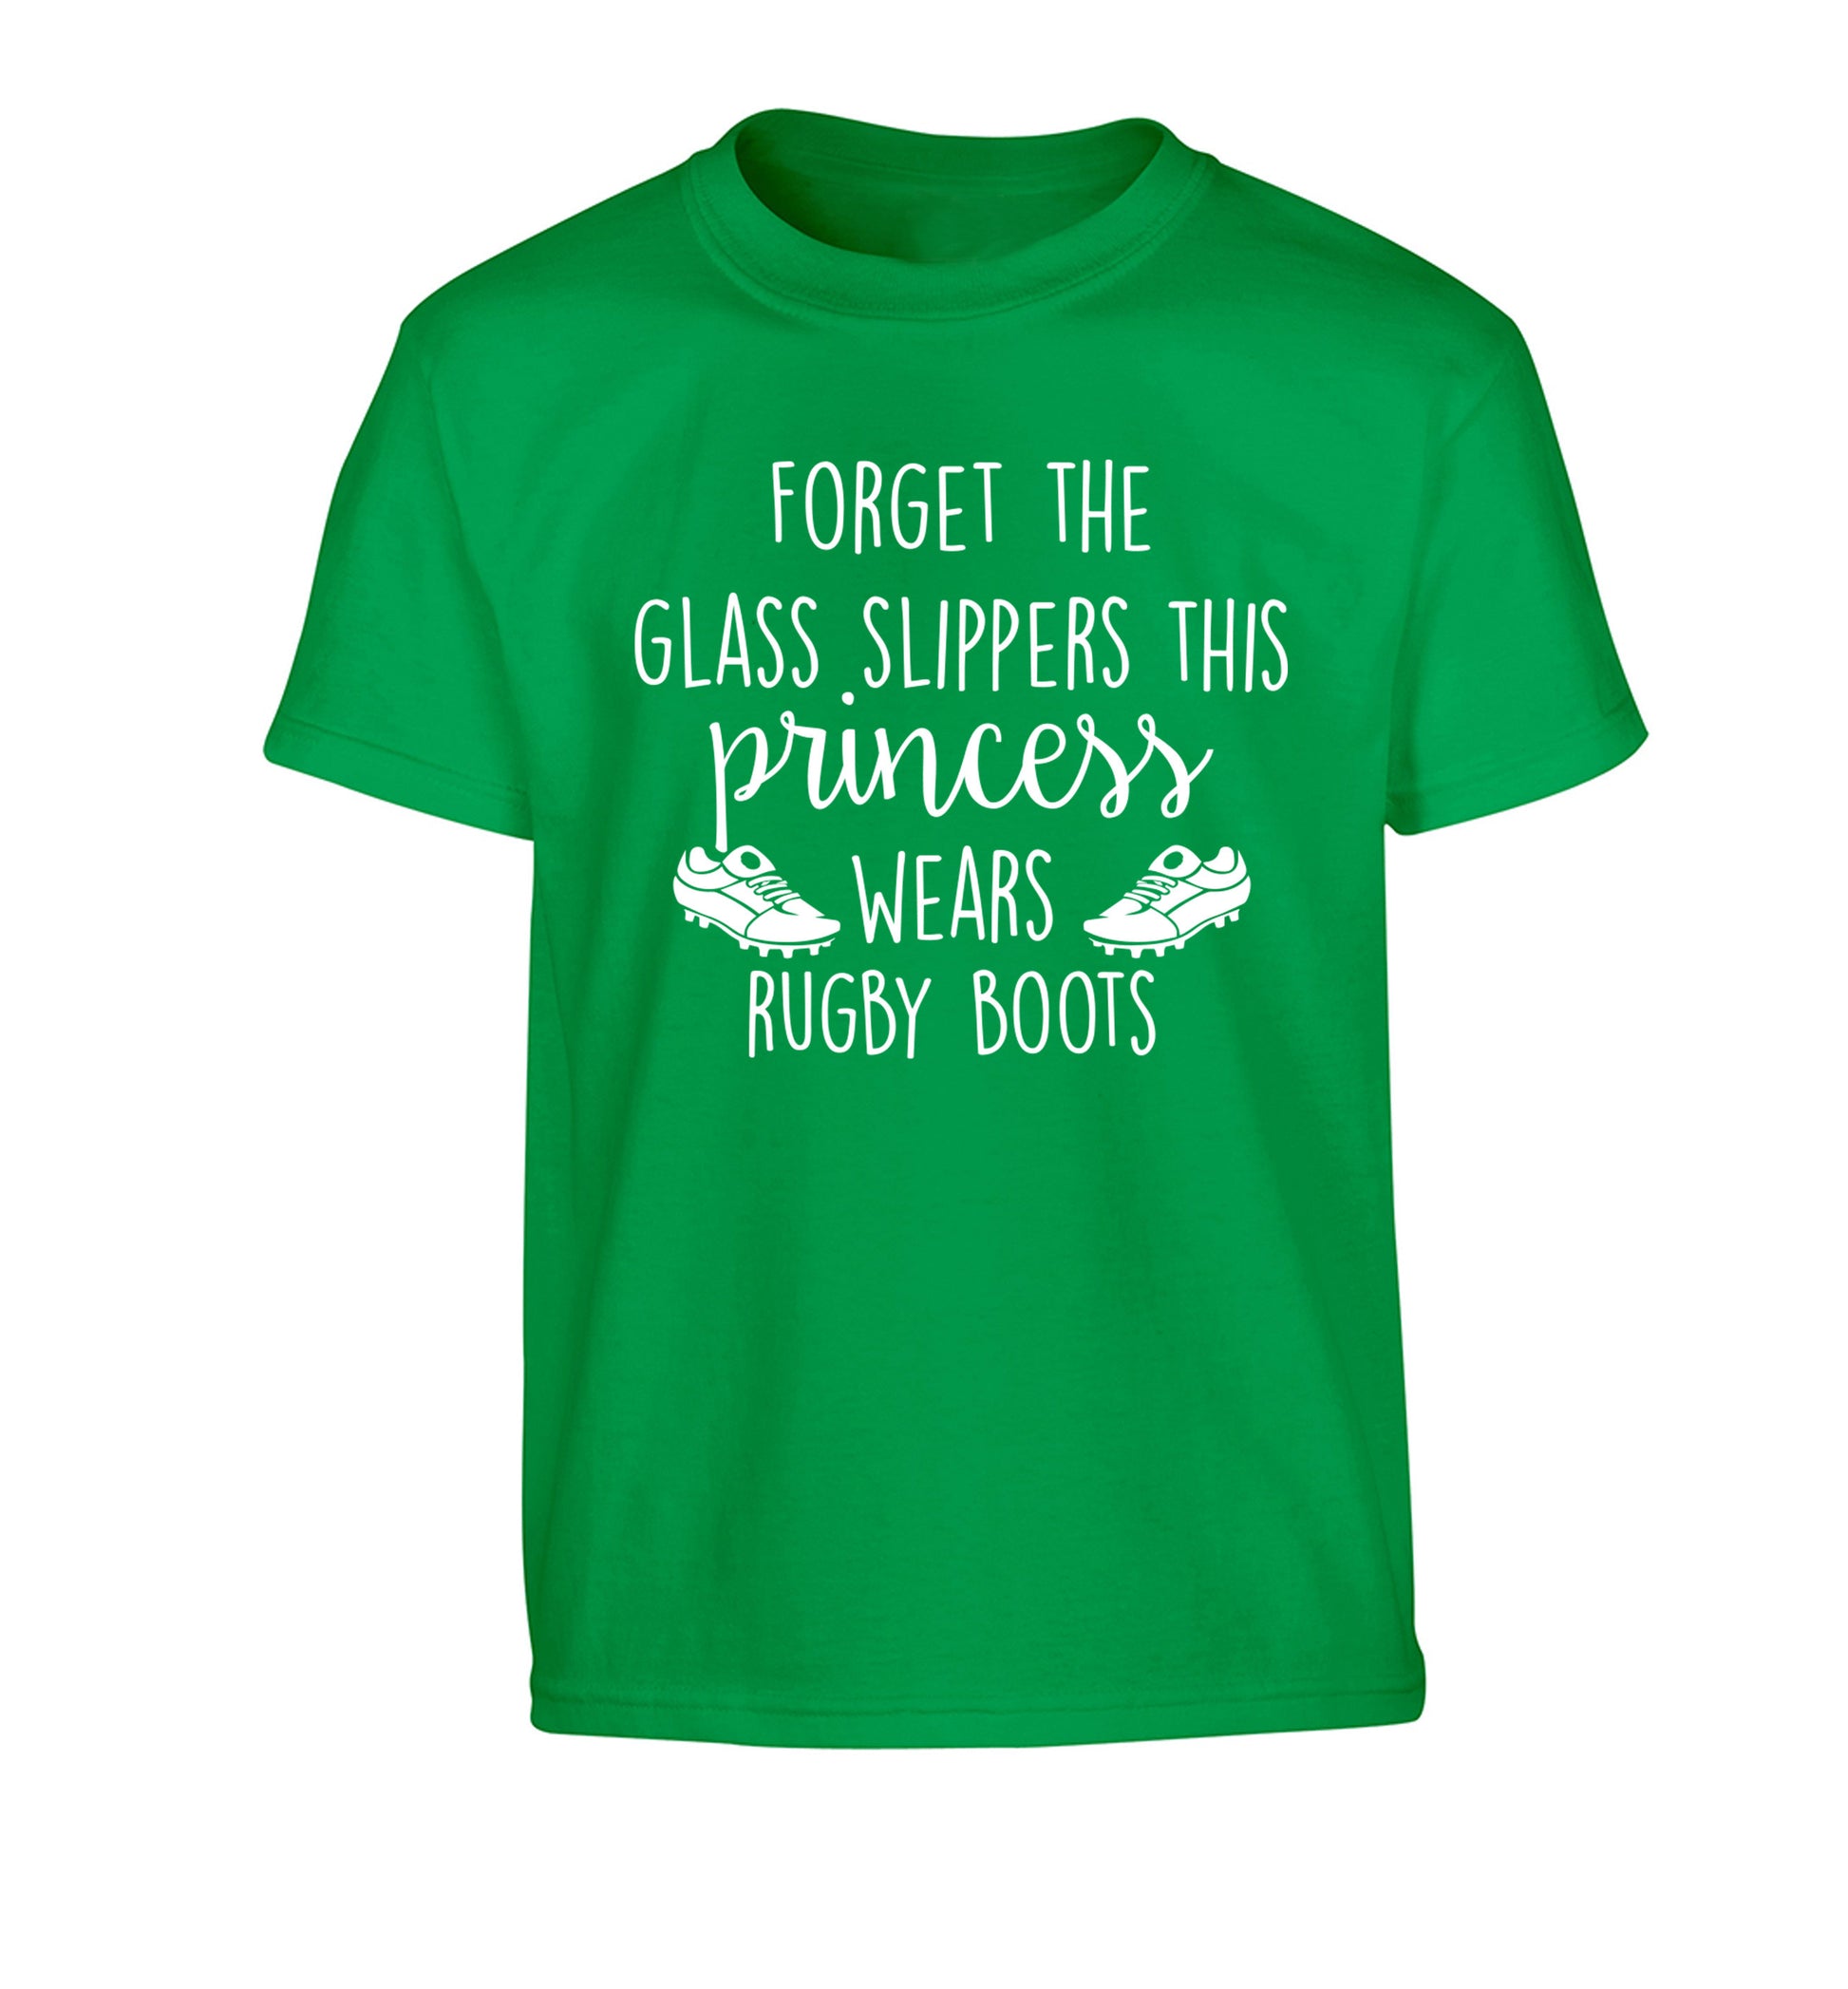 Forget the glass slippers this princess wears rugby boots Children's green Tshirt 12-14 Years